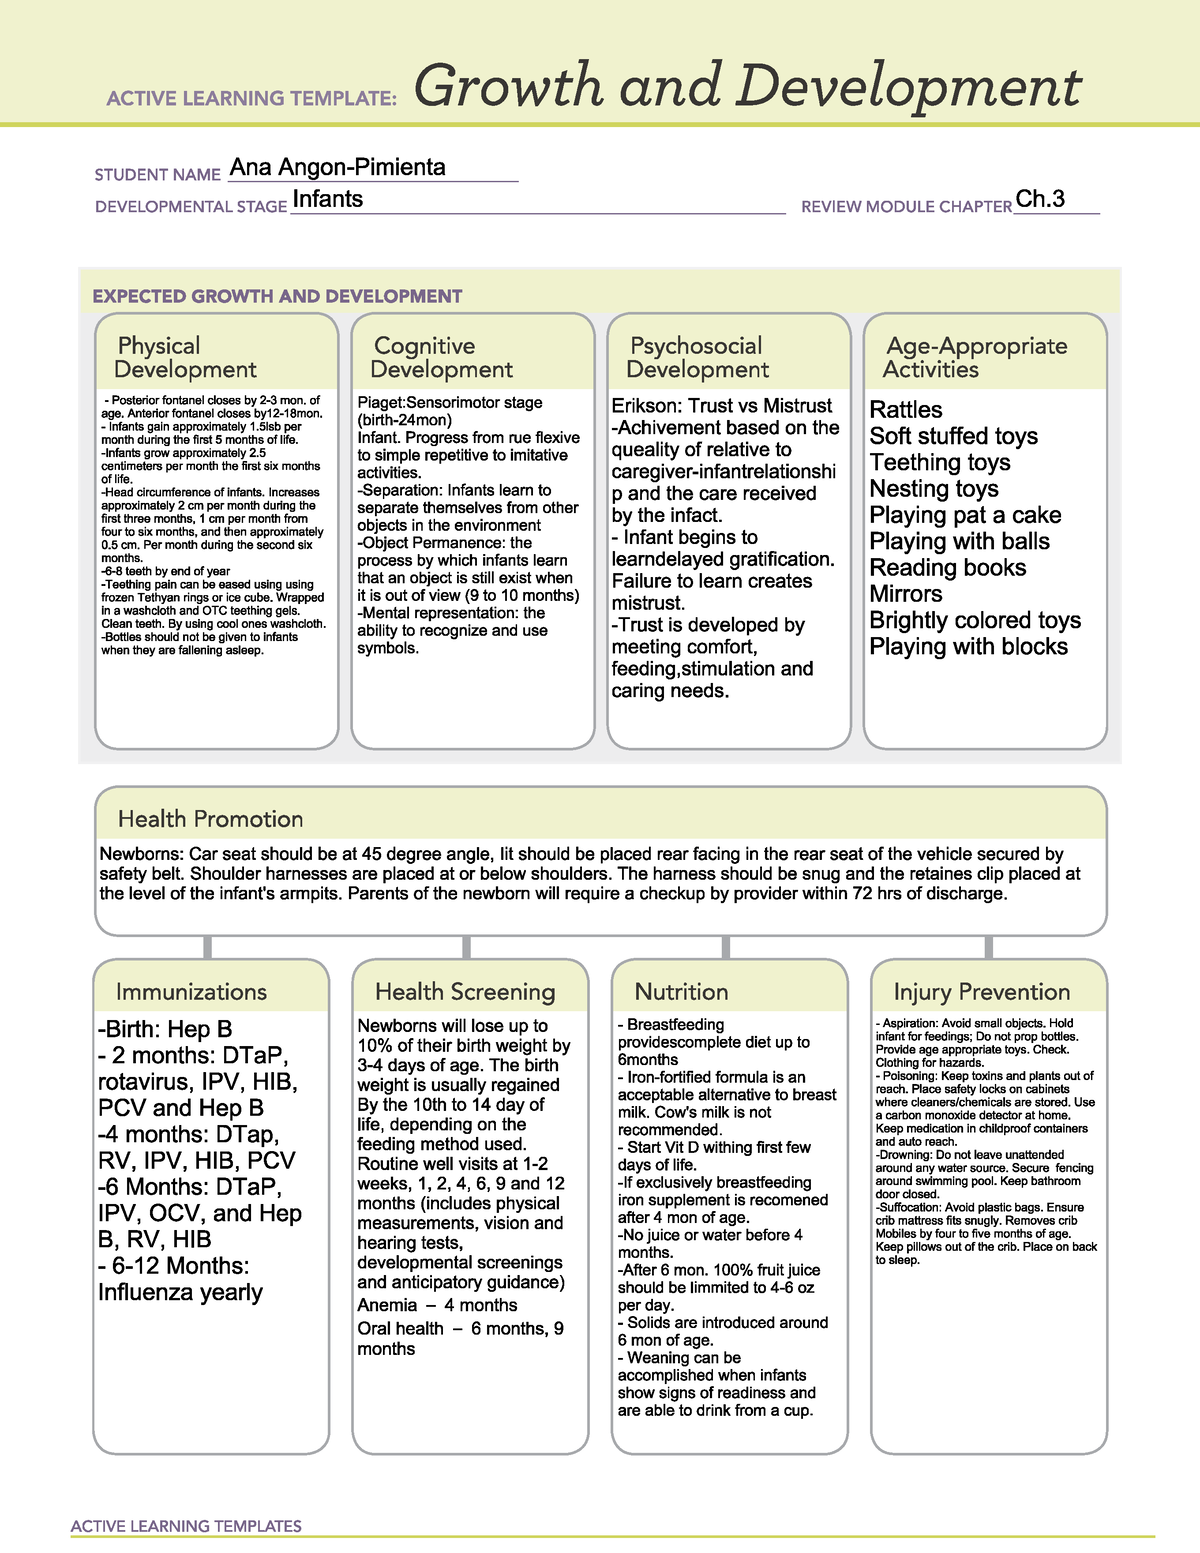 ati-growth-and-development-active-learning-template-handout-infant-template-57-705-305-studocu